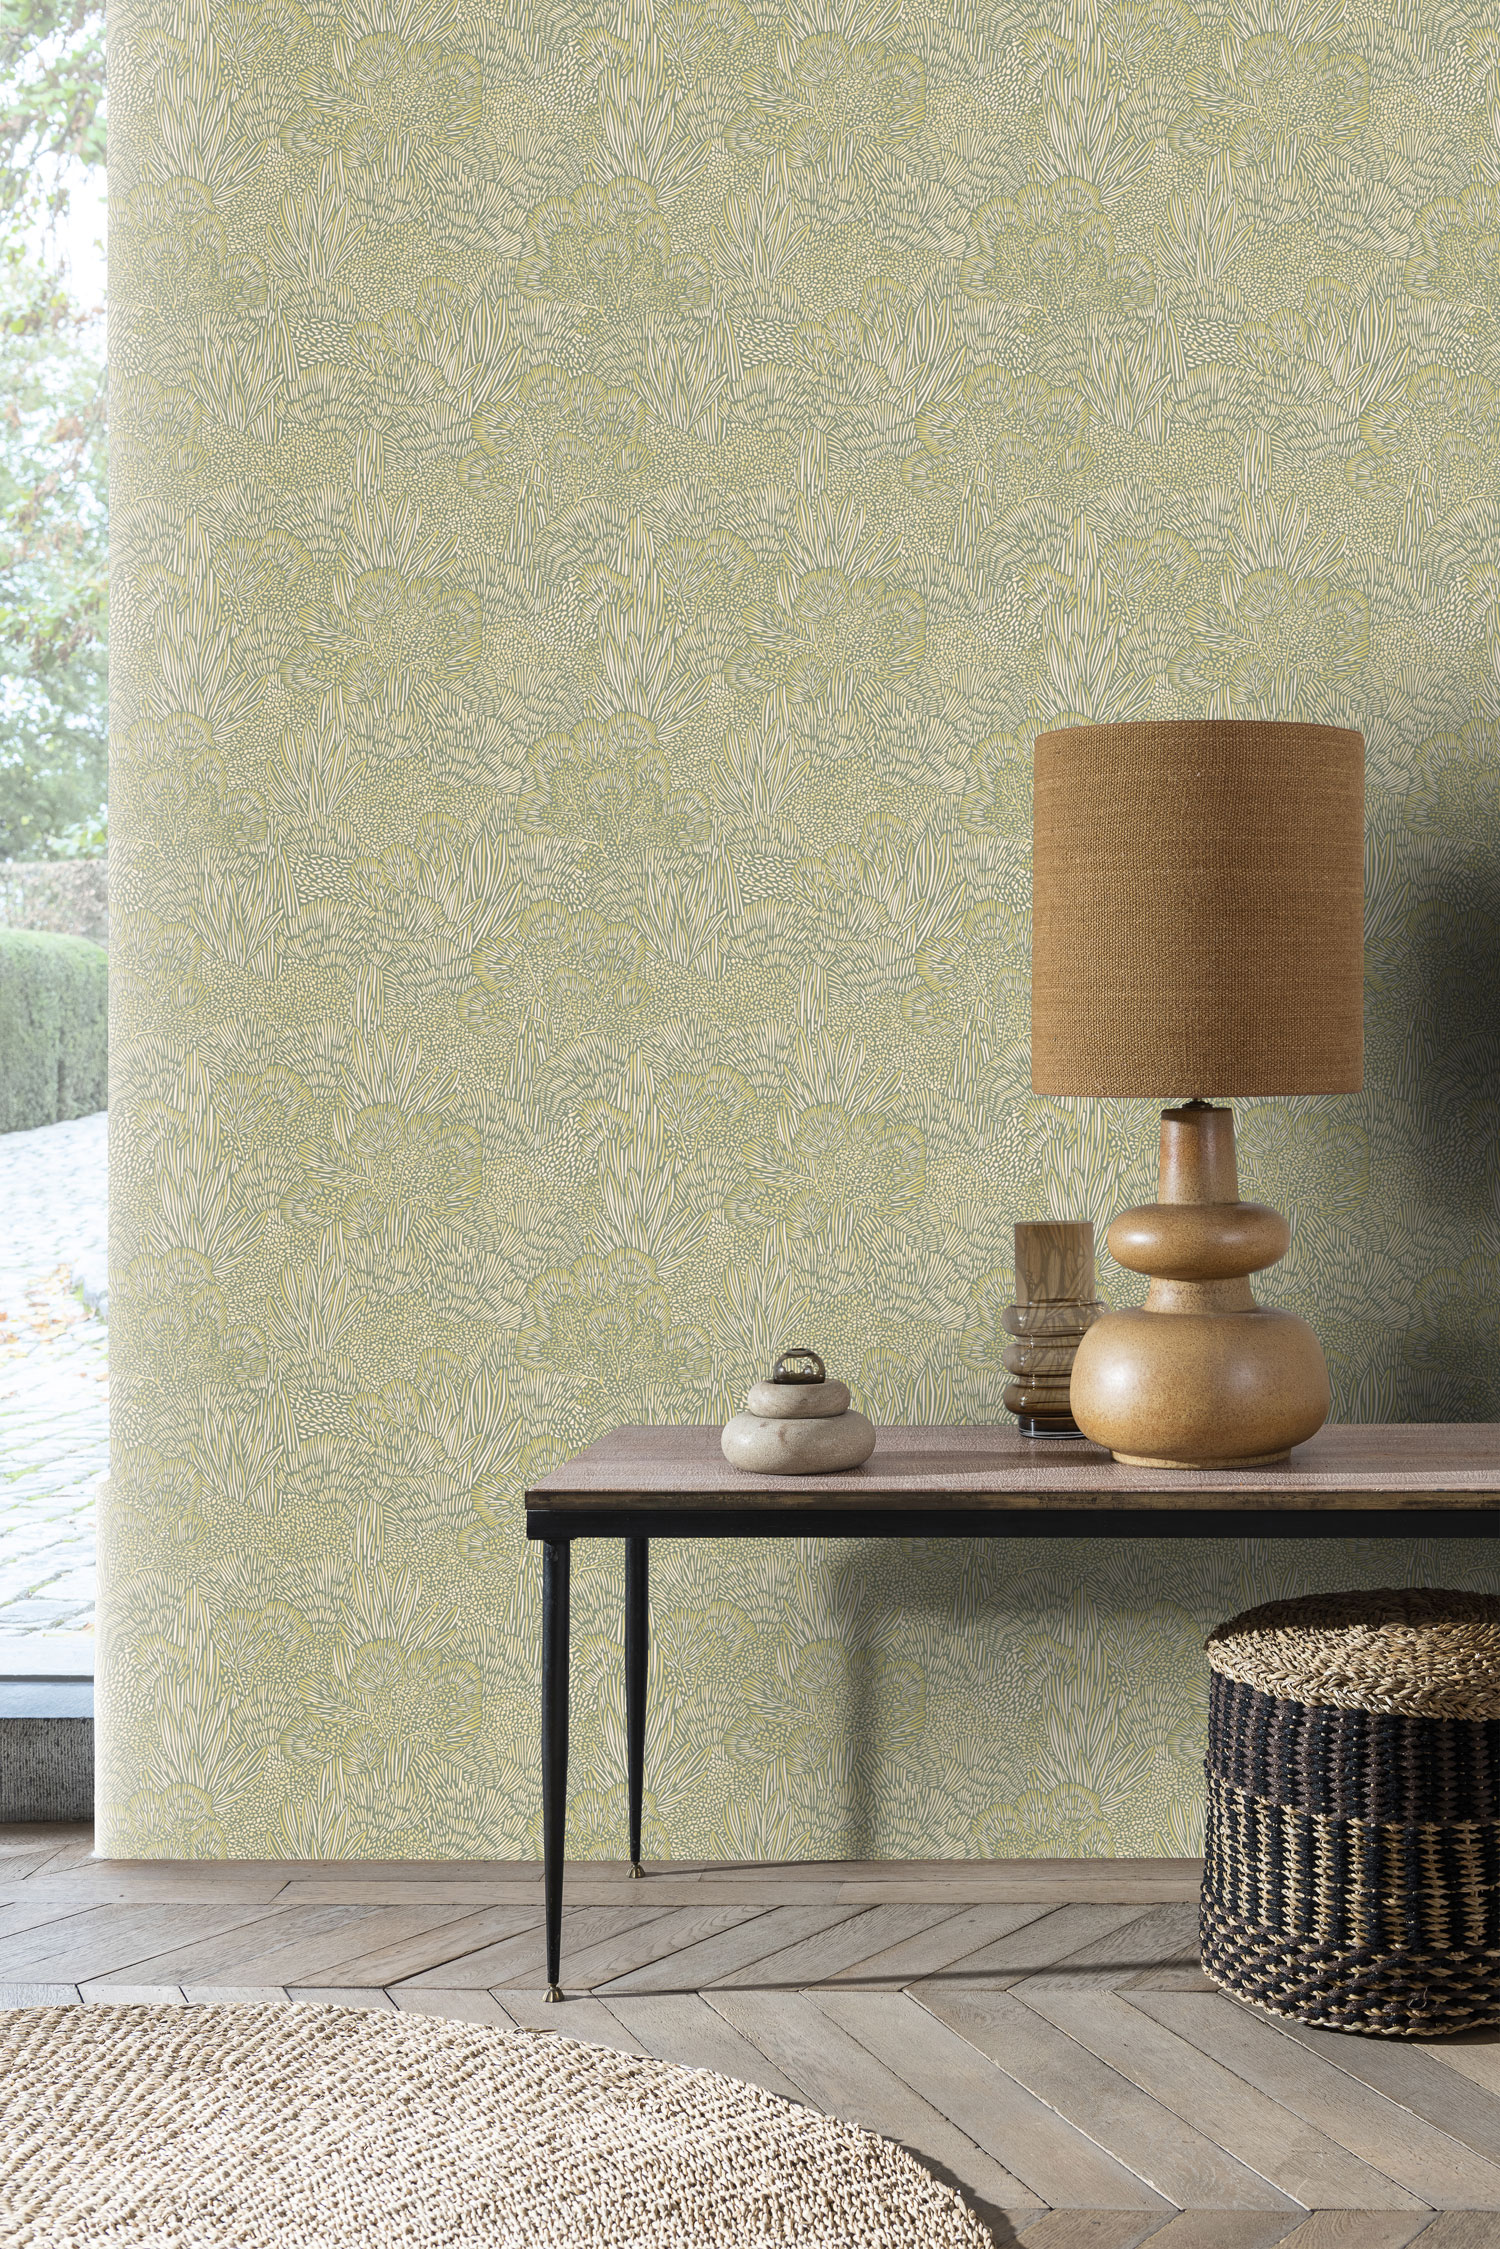 Elegant interior adorned with impressive wallpaper for a luxurious atmosphere.